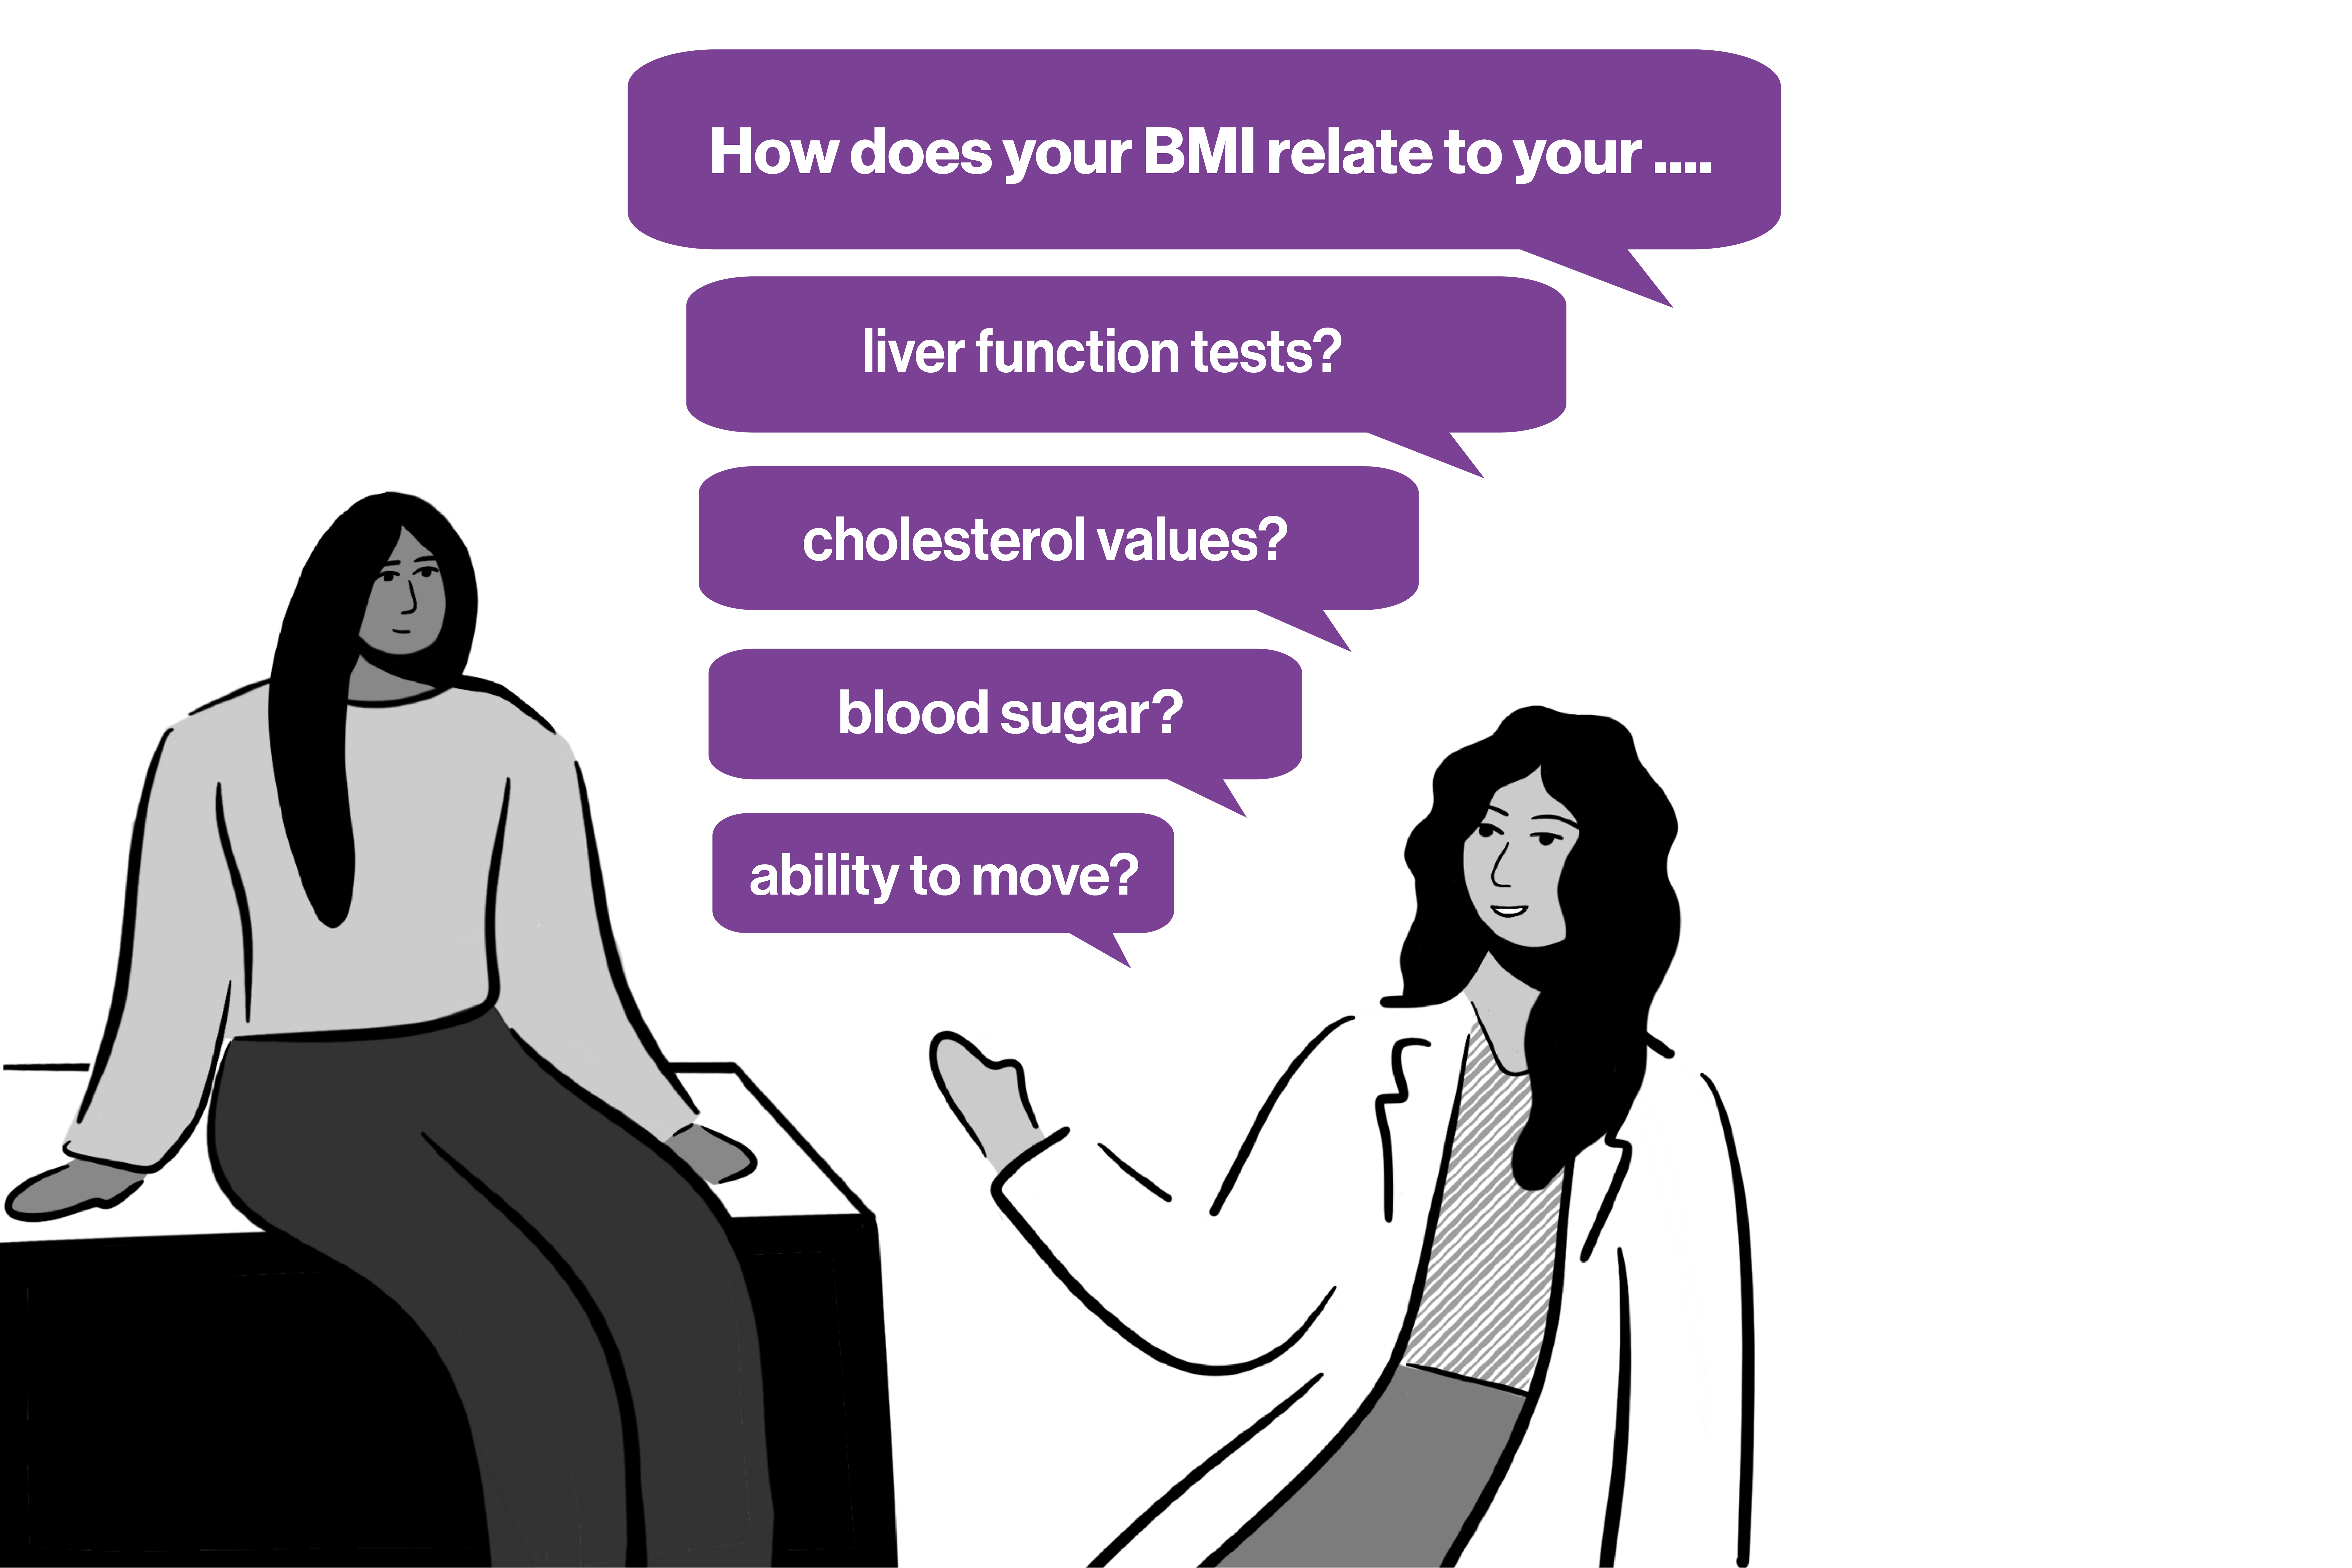 Doctor asking patient: "How does your BMI relate to your... liver function tests? Cholesterol values? Blood sugar? Ability to move?